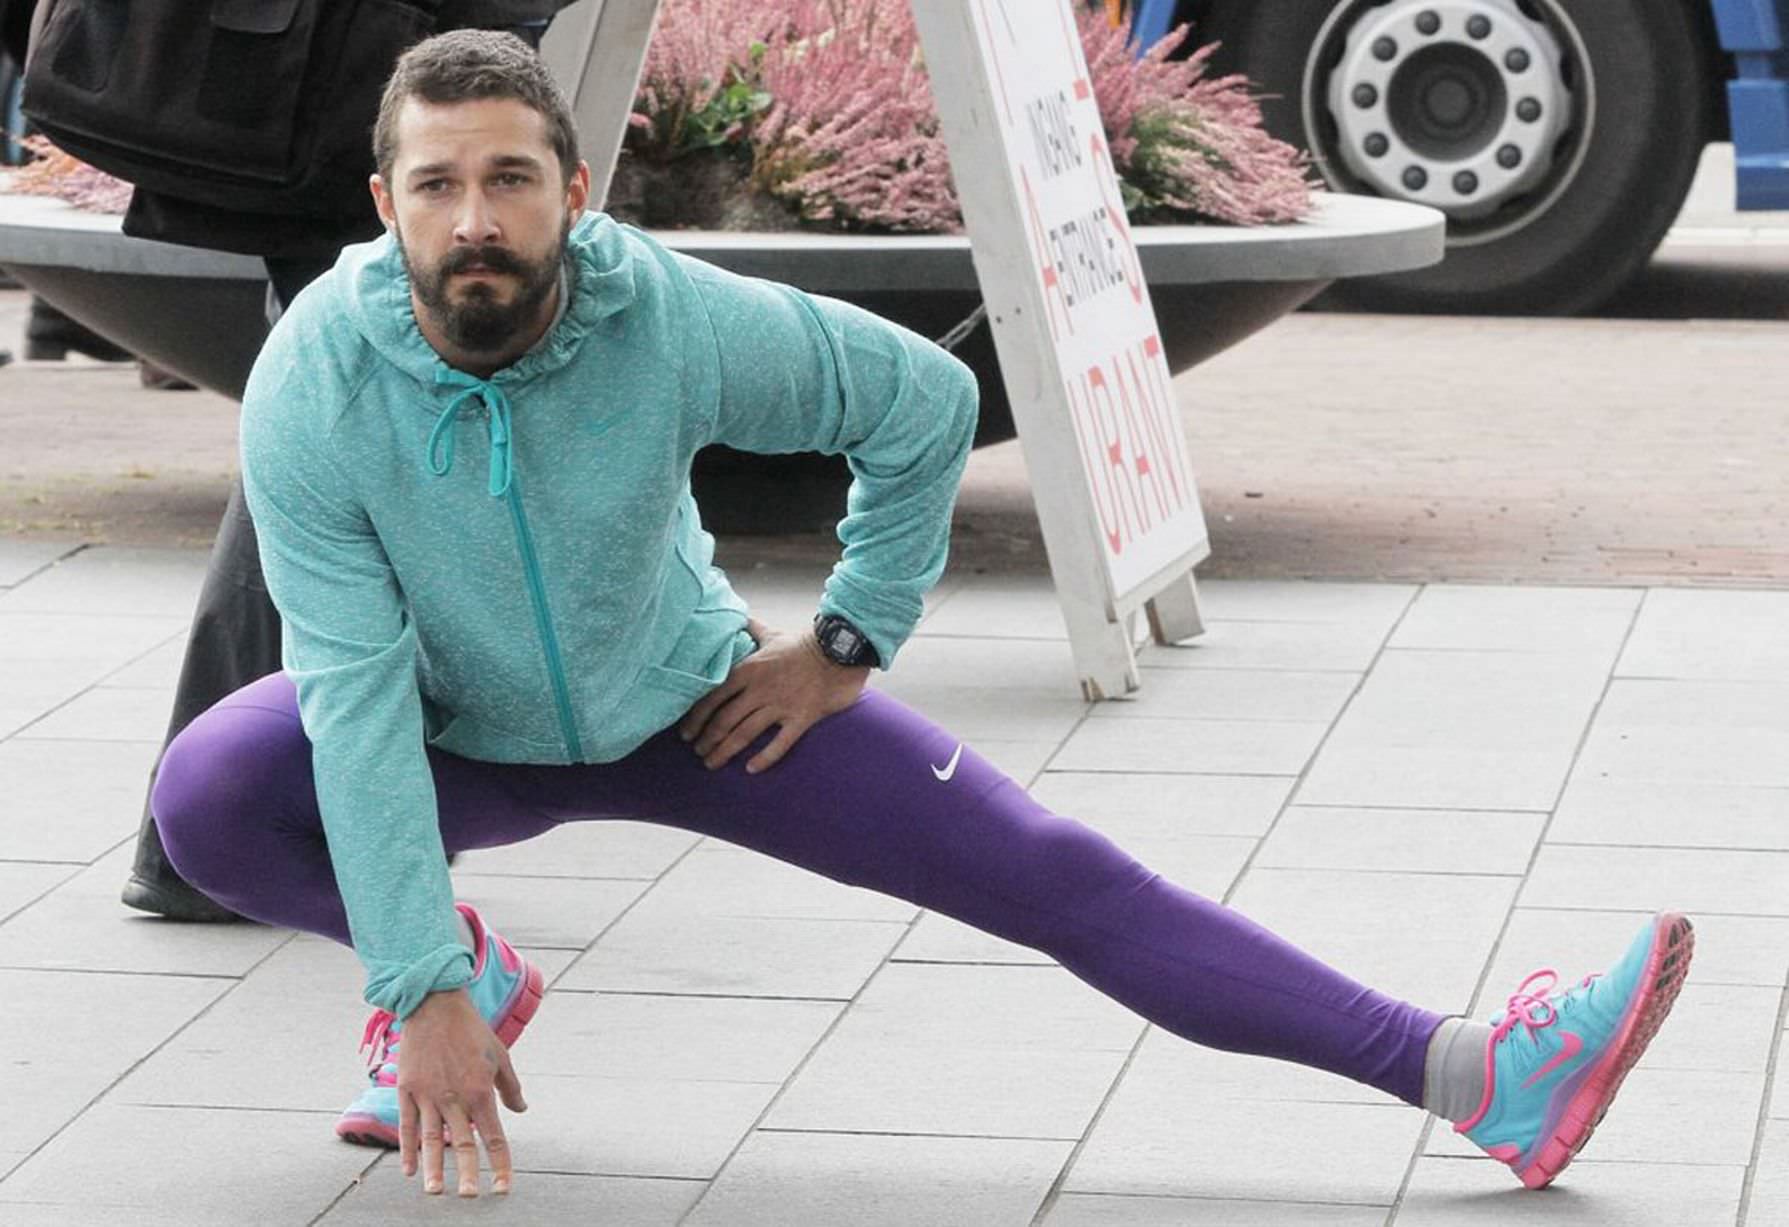 This-Shia-LaBeouf-Stretching-Photoshop-Battle-going-crazy-on-social-media